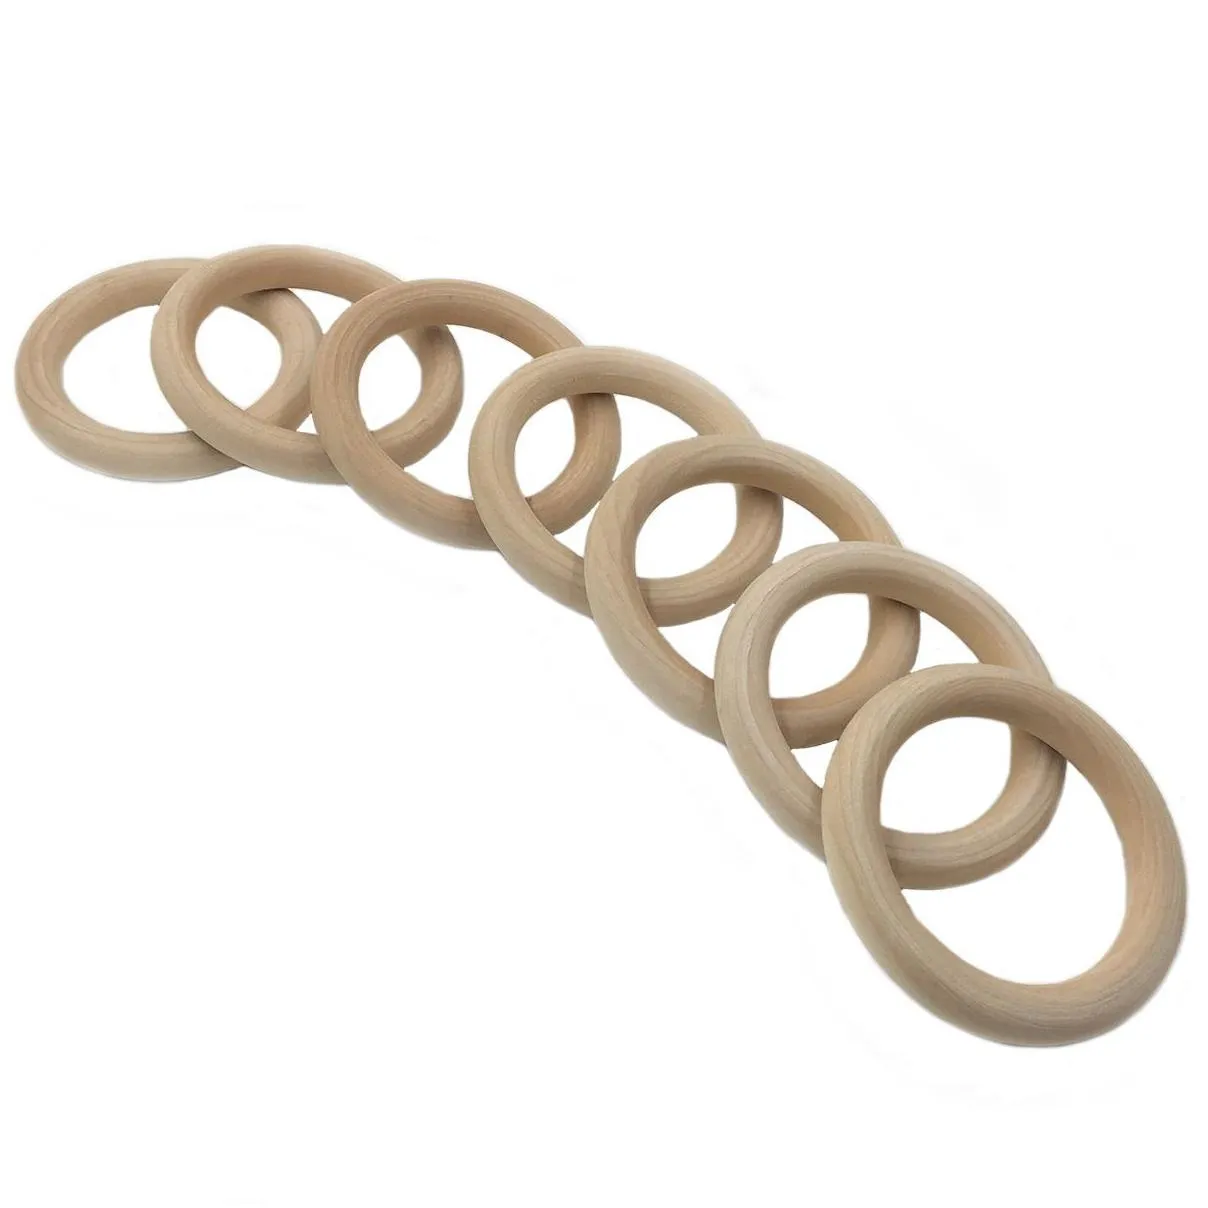 50mm Baby Wooden Teethers Ring Kids Wood Soothers Children DIY Jewelry Making Craft Bracelet Soother M1714